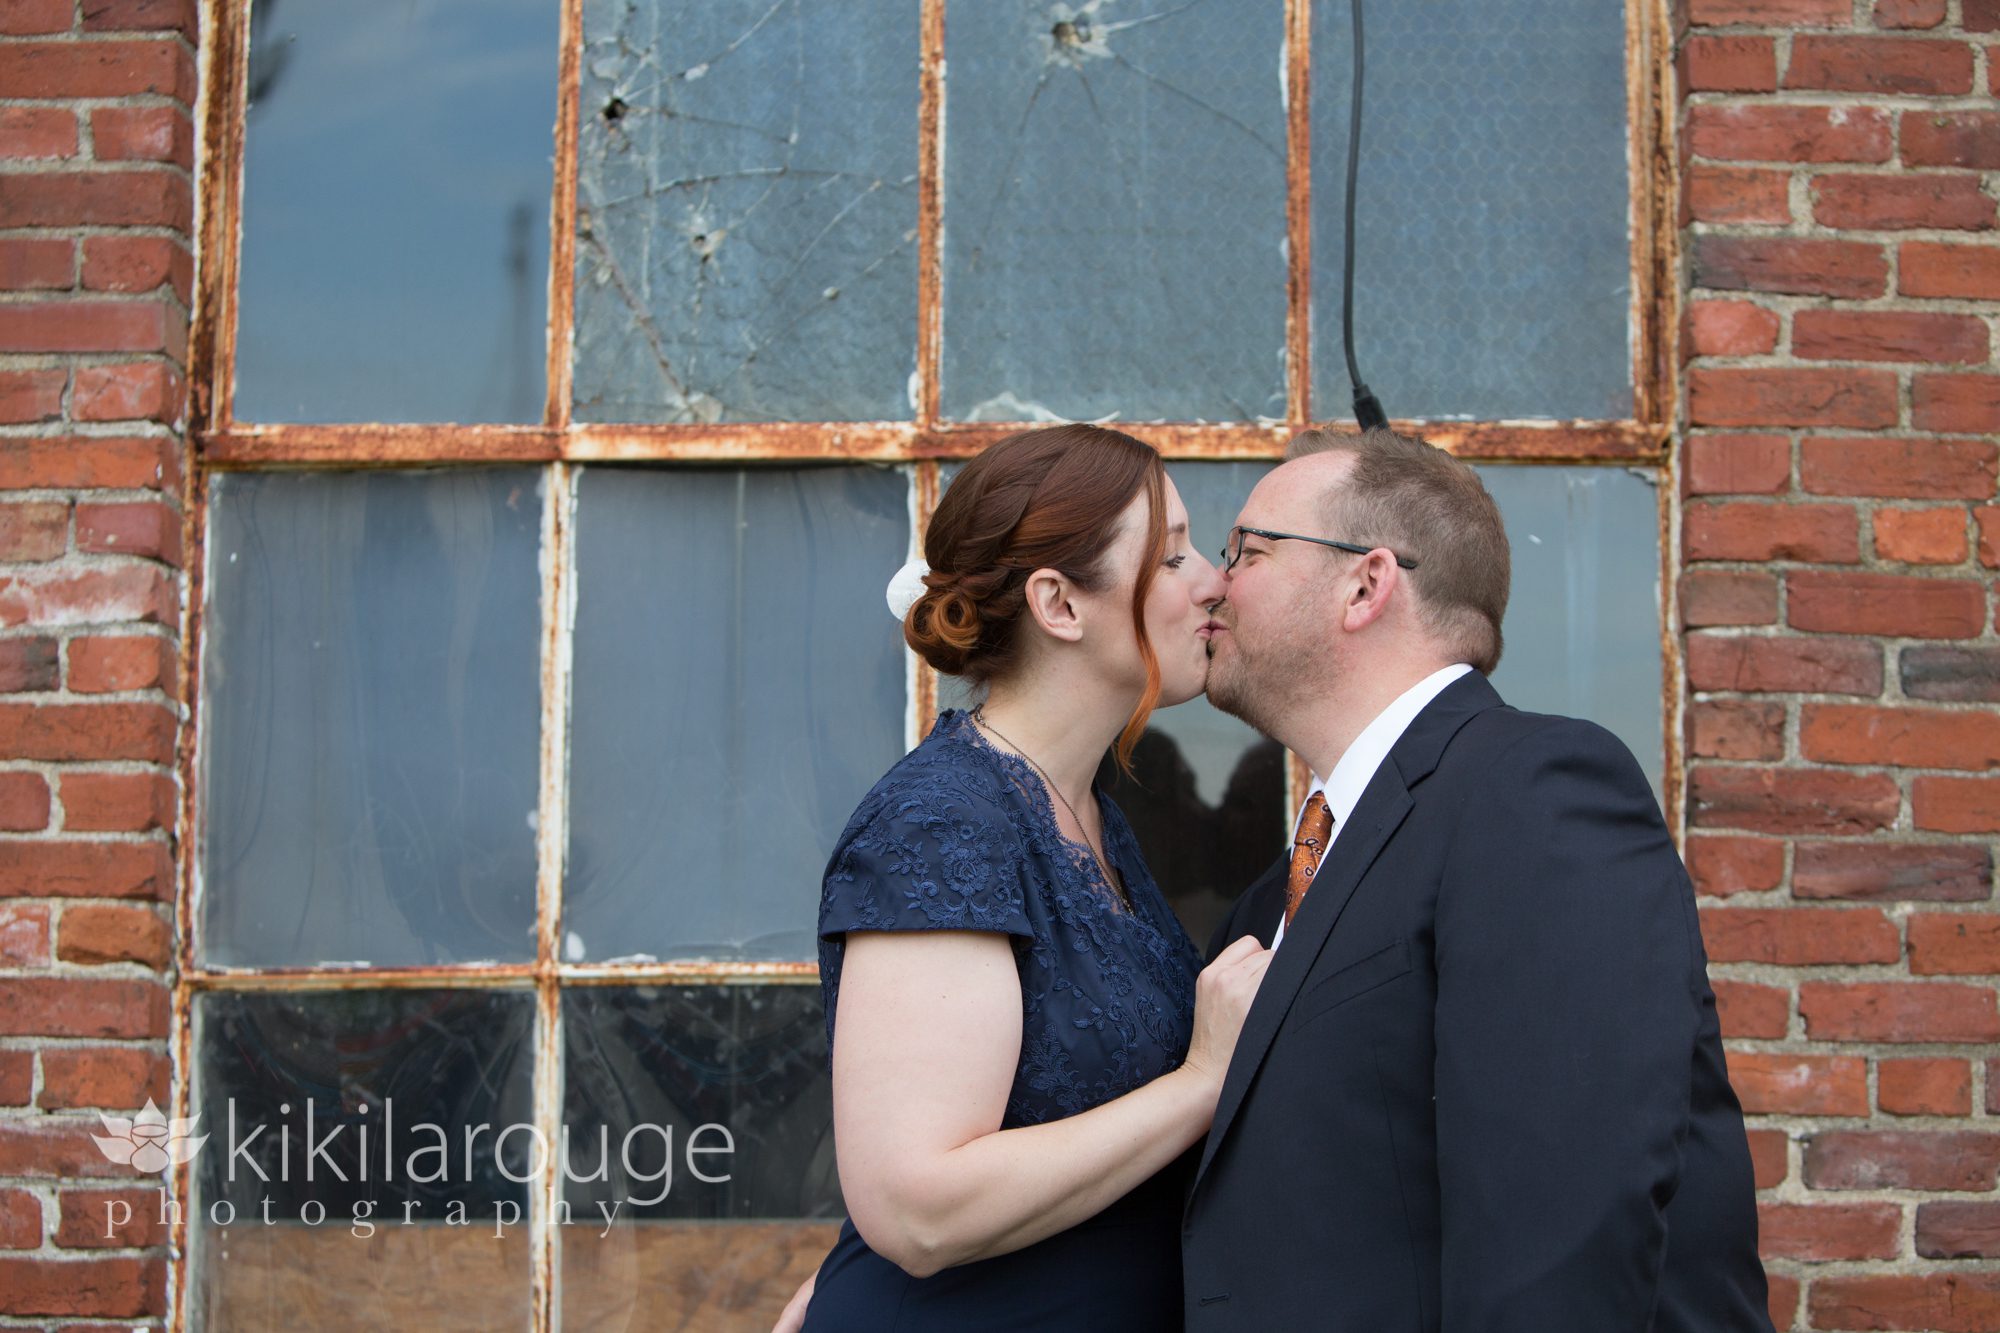 Couple kissing in front of windows with reflection